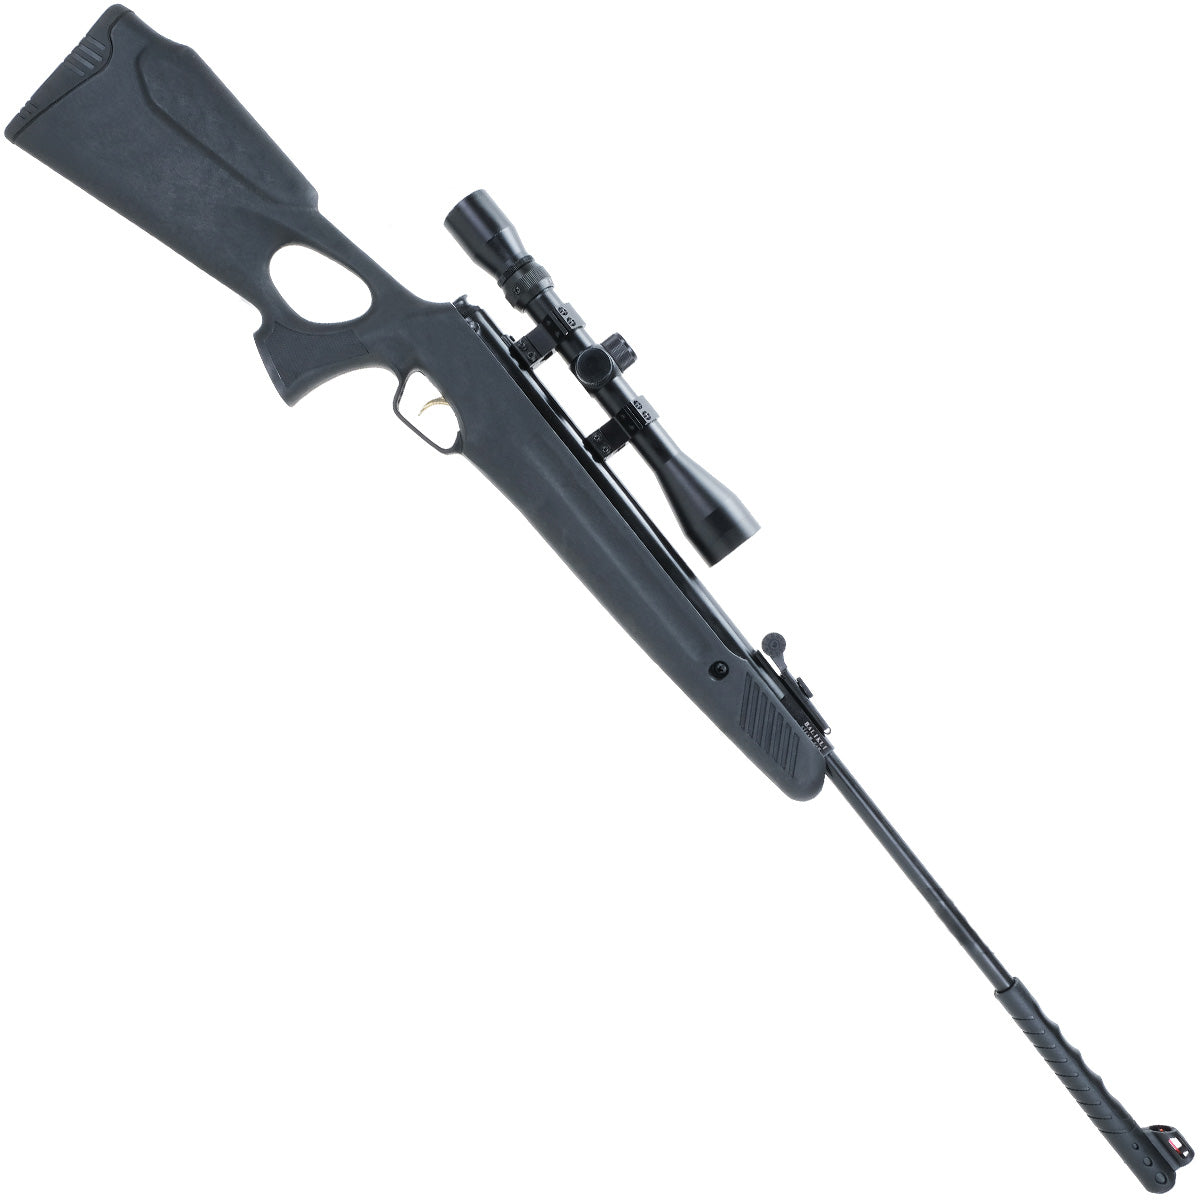 SALIX, TRIMEX ARMS TX04 BREAK BARREL SPRING AIR RIFLE WITH SYNTHETIC STOCK .22